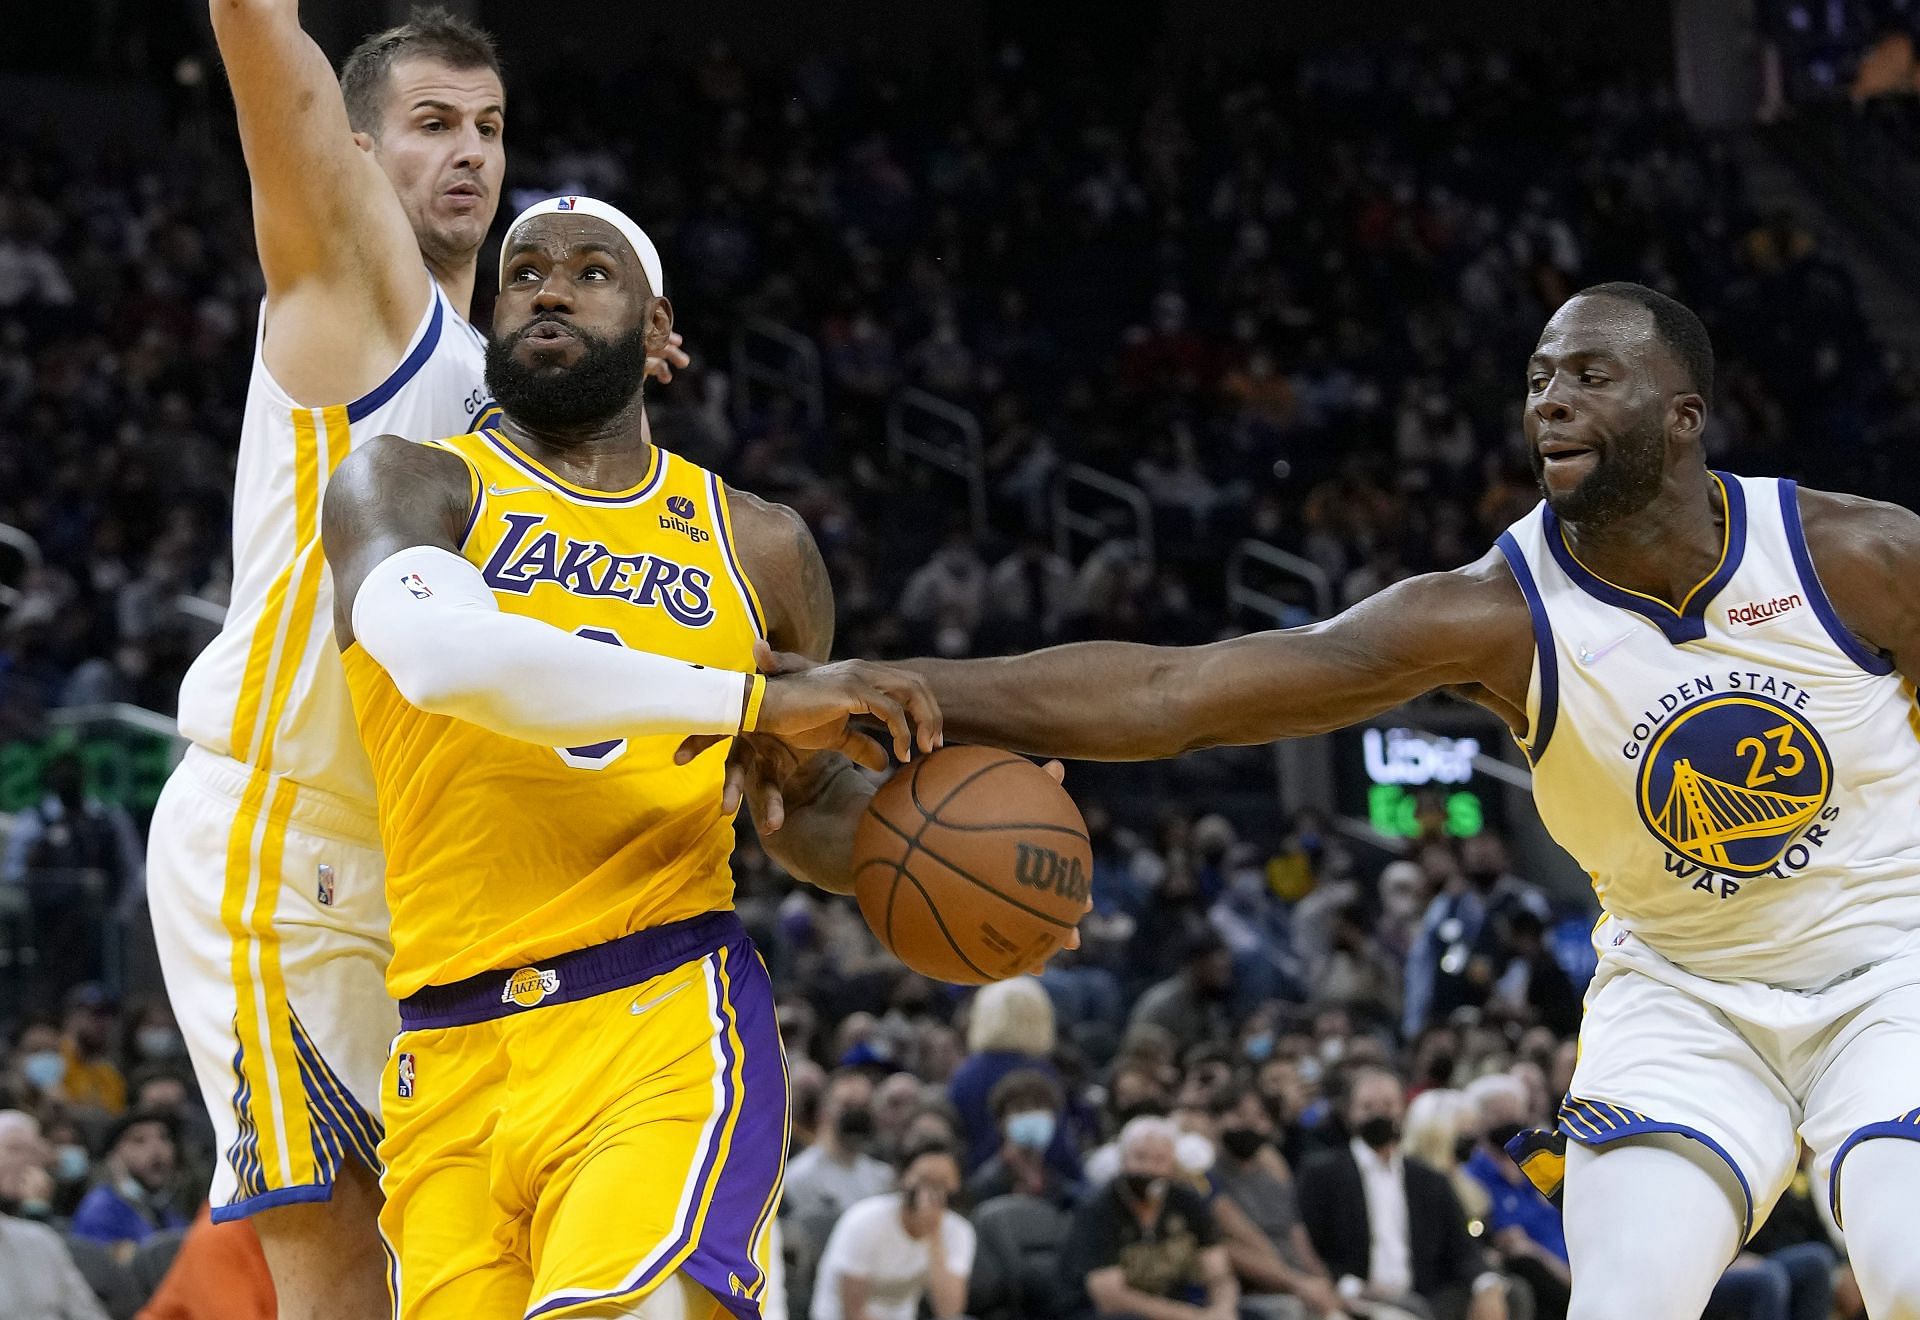 Draymond Green  of the Golden State Warriors slaps the ball away from LeBron James of the LA Lakers.